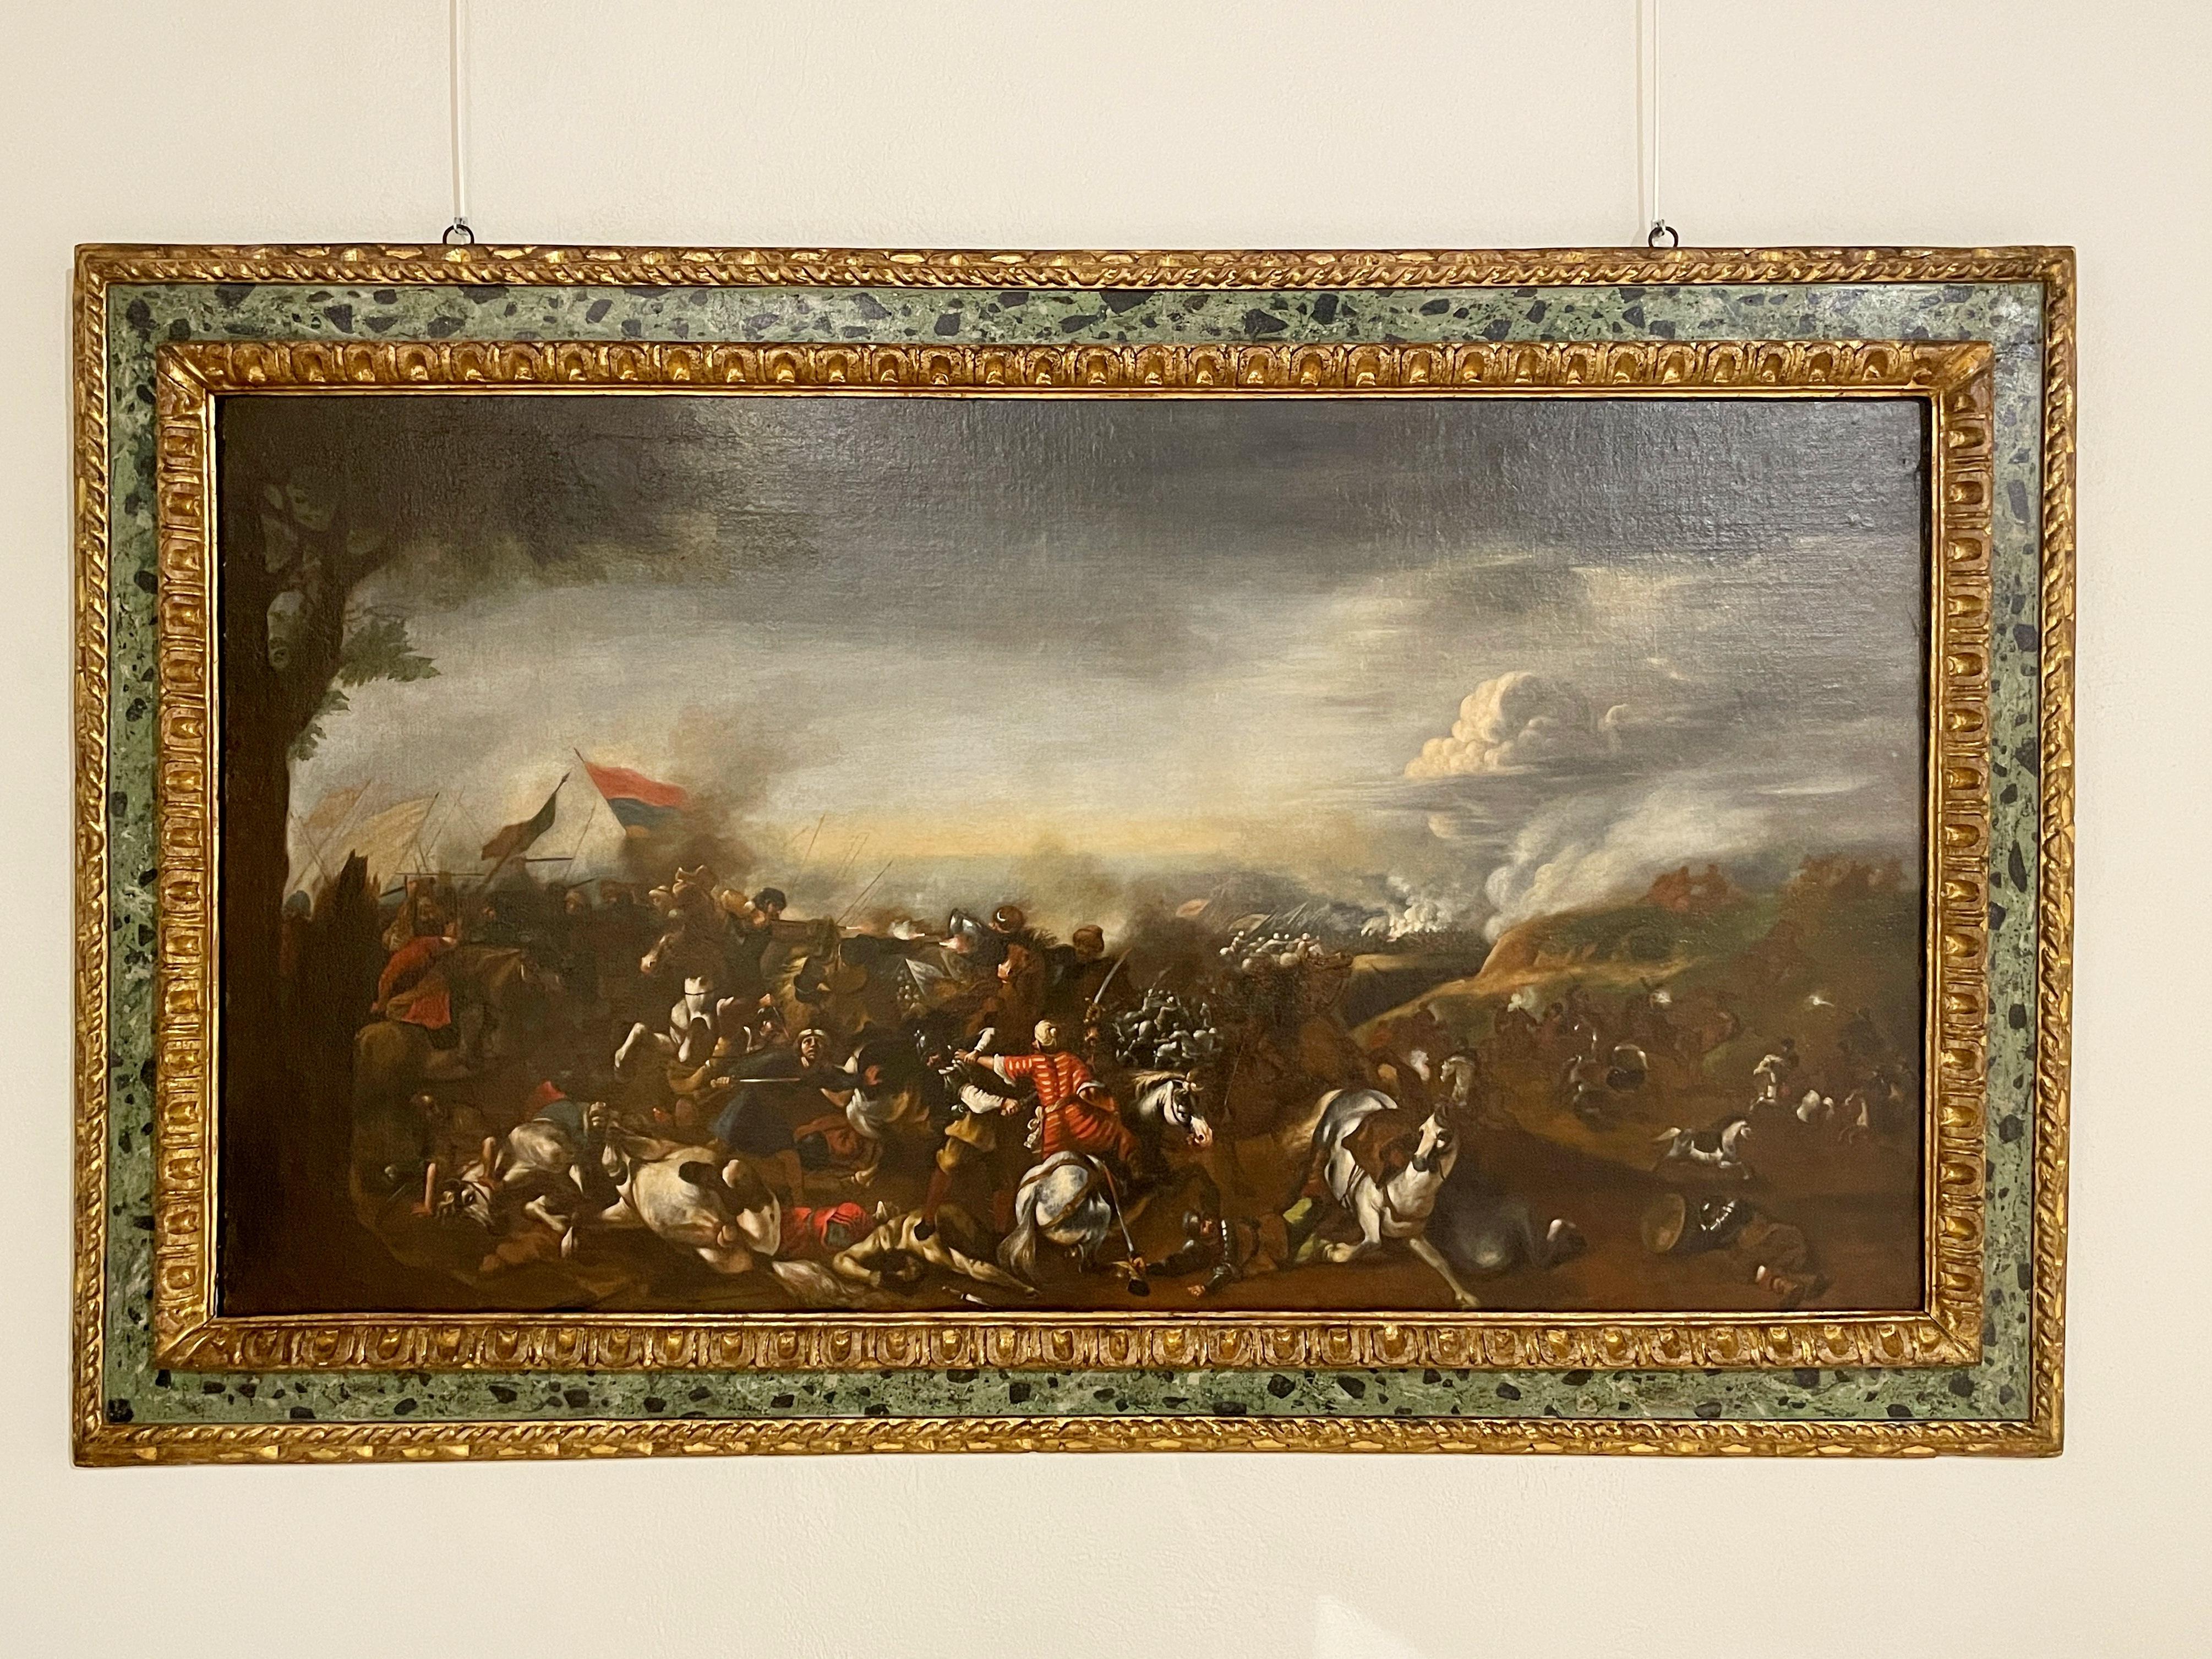 17th century, Italian battle between Turks and Christians

Oil on canvas - Measurements: with frame, cm H 110 x W 180 x D 5; only the canvas, cm H 83 x W 155

The painting, characteristic of the Italian Baroque tradition, depicts a bloody battle